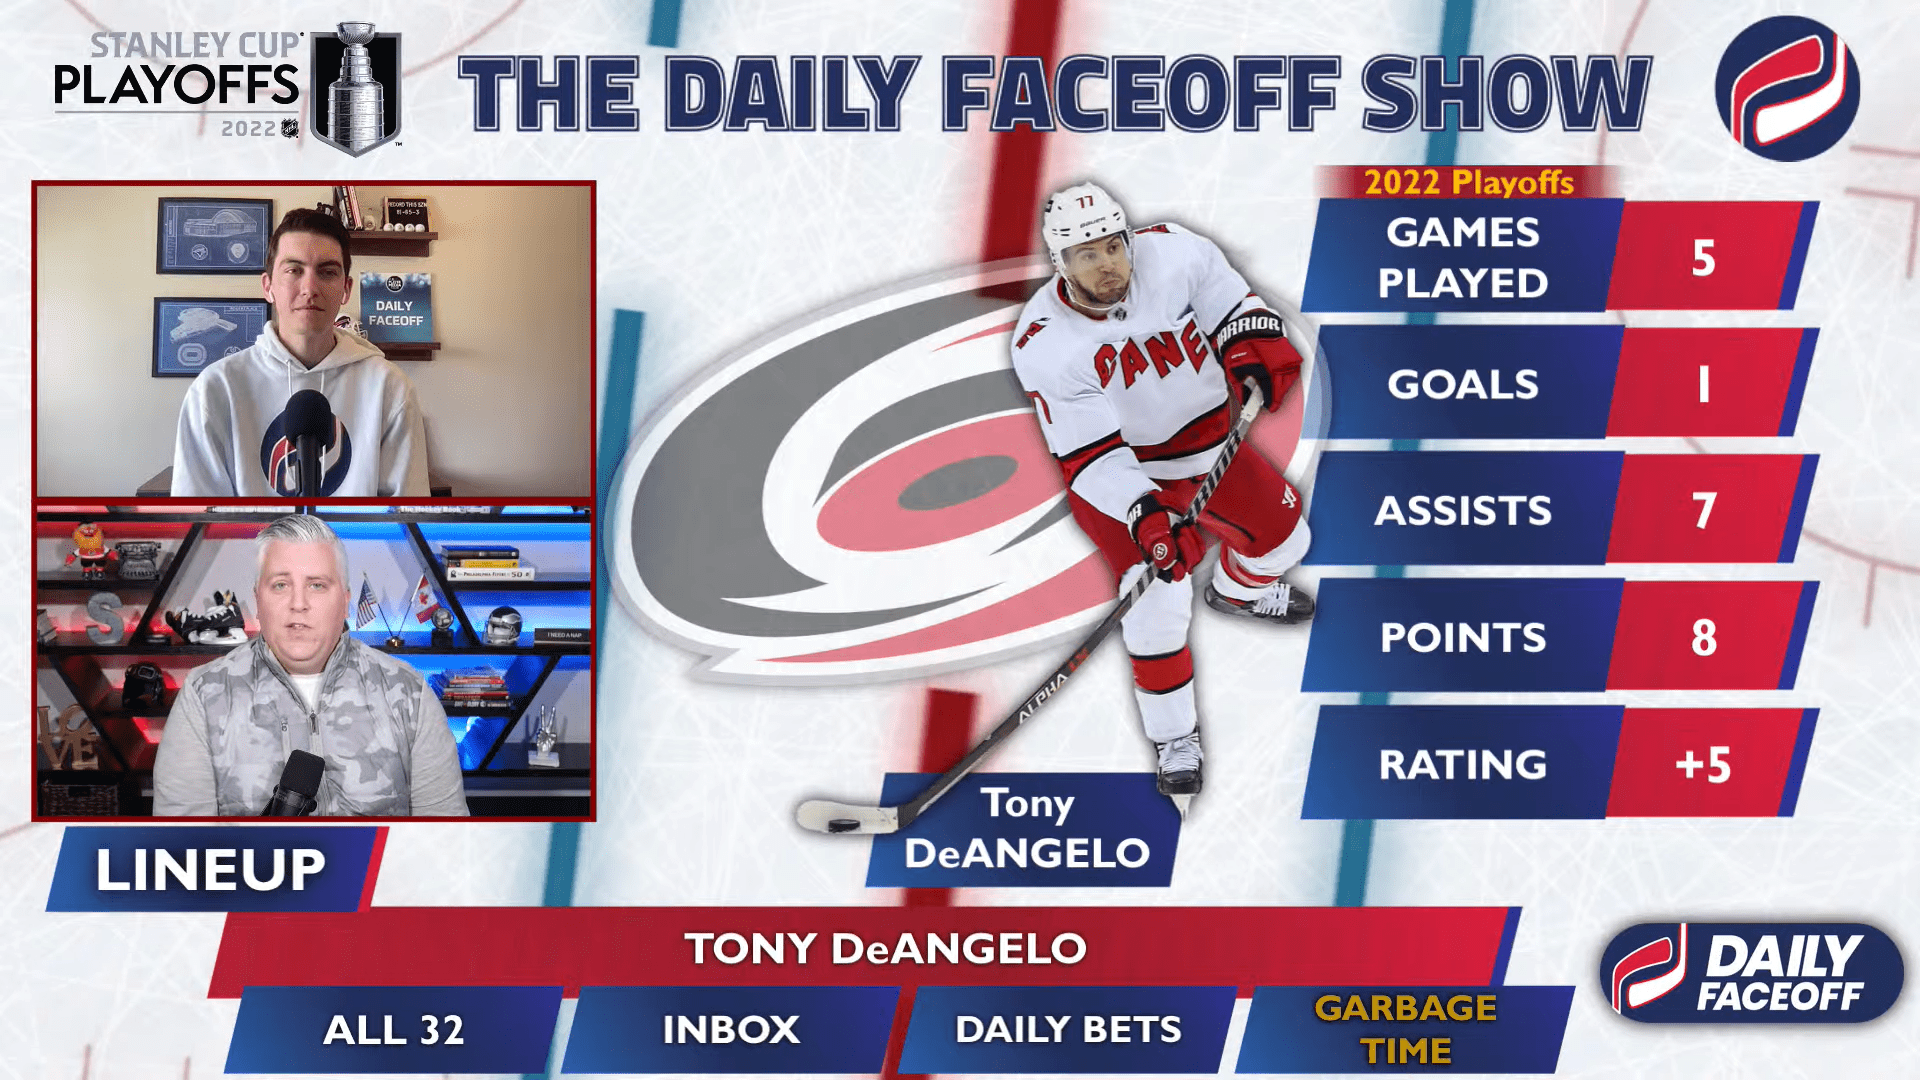 The Daily Faceoff Show: Tony DeAngelo embracing the villain role in the playoffs